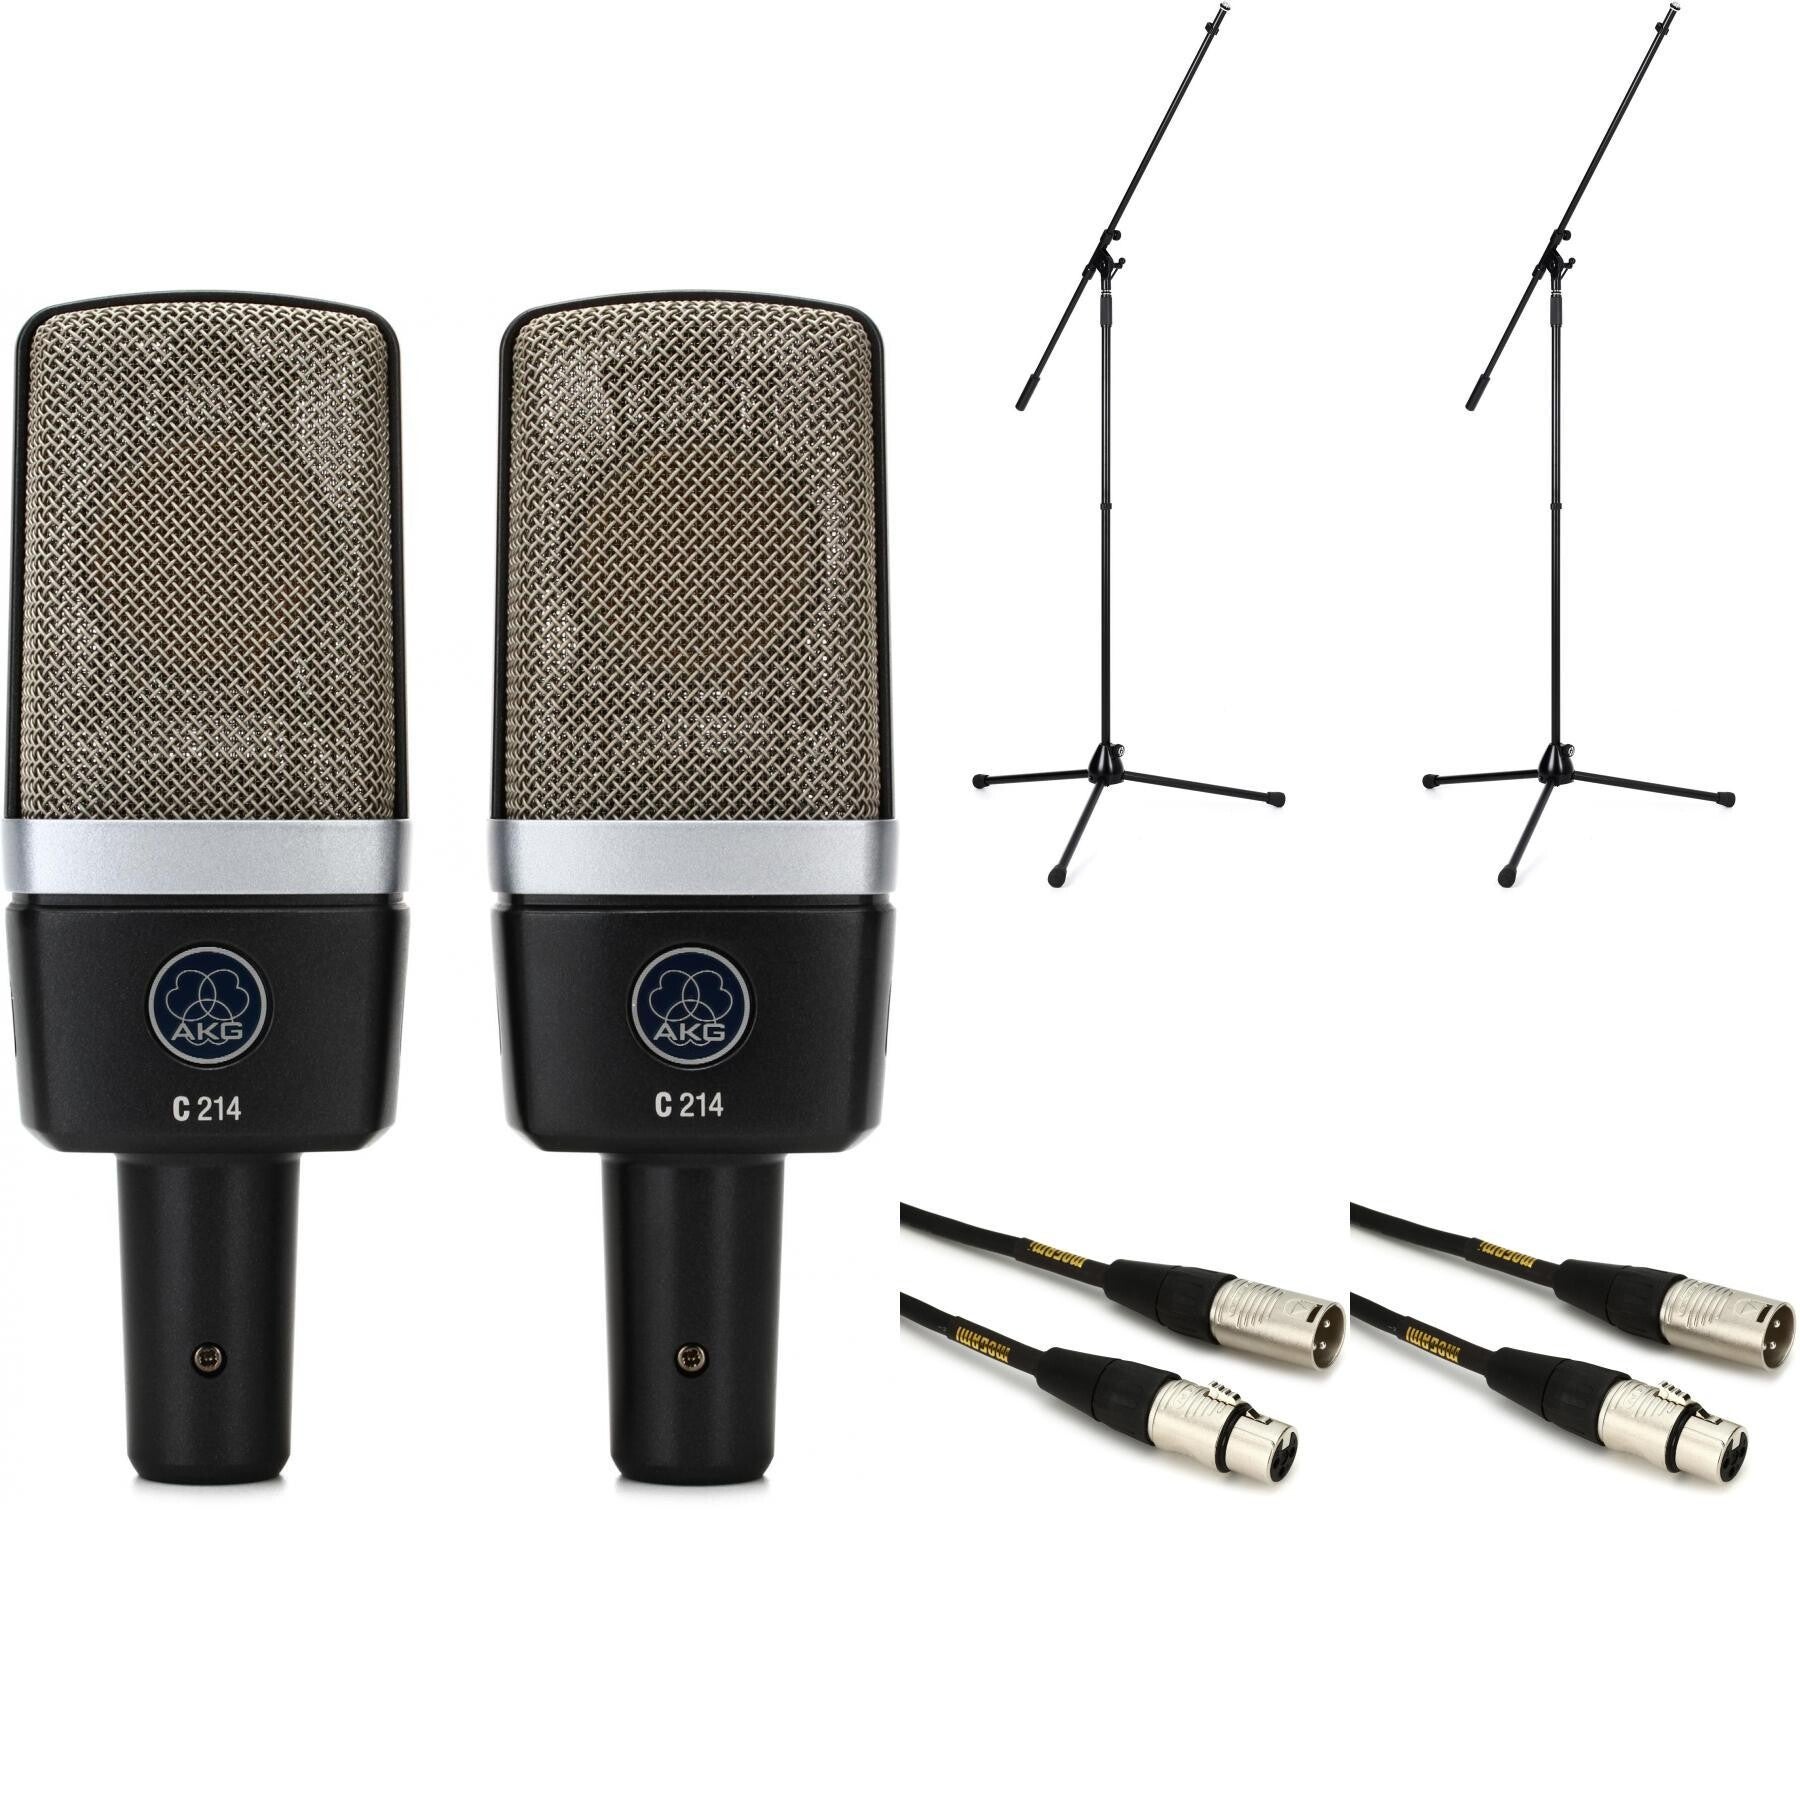 AKG C214 Large-diaphragm Condenser Microphone Bundle with Stands and Cables  - Matched Stereo Pair